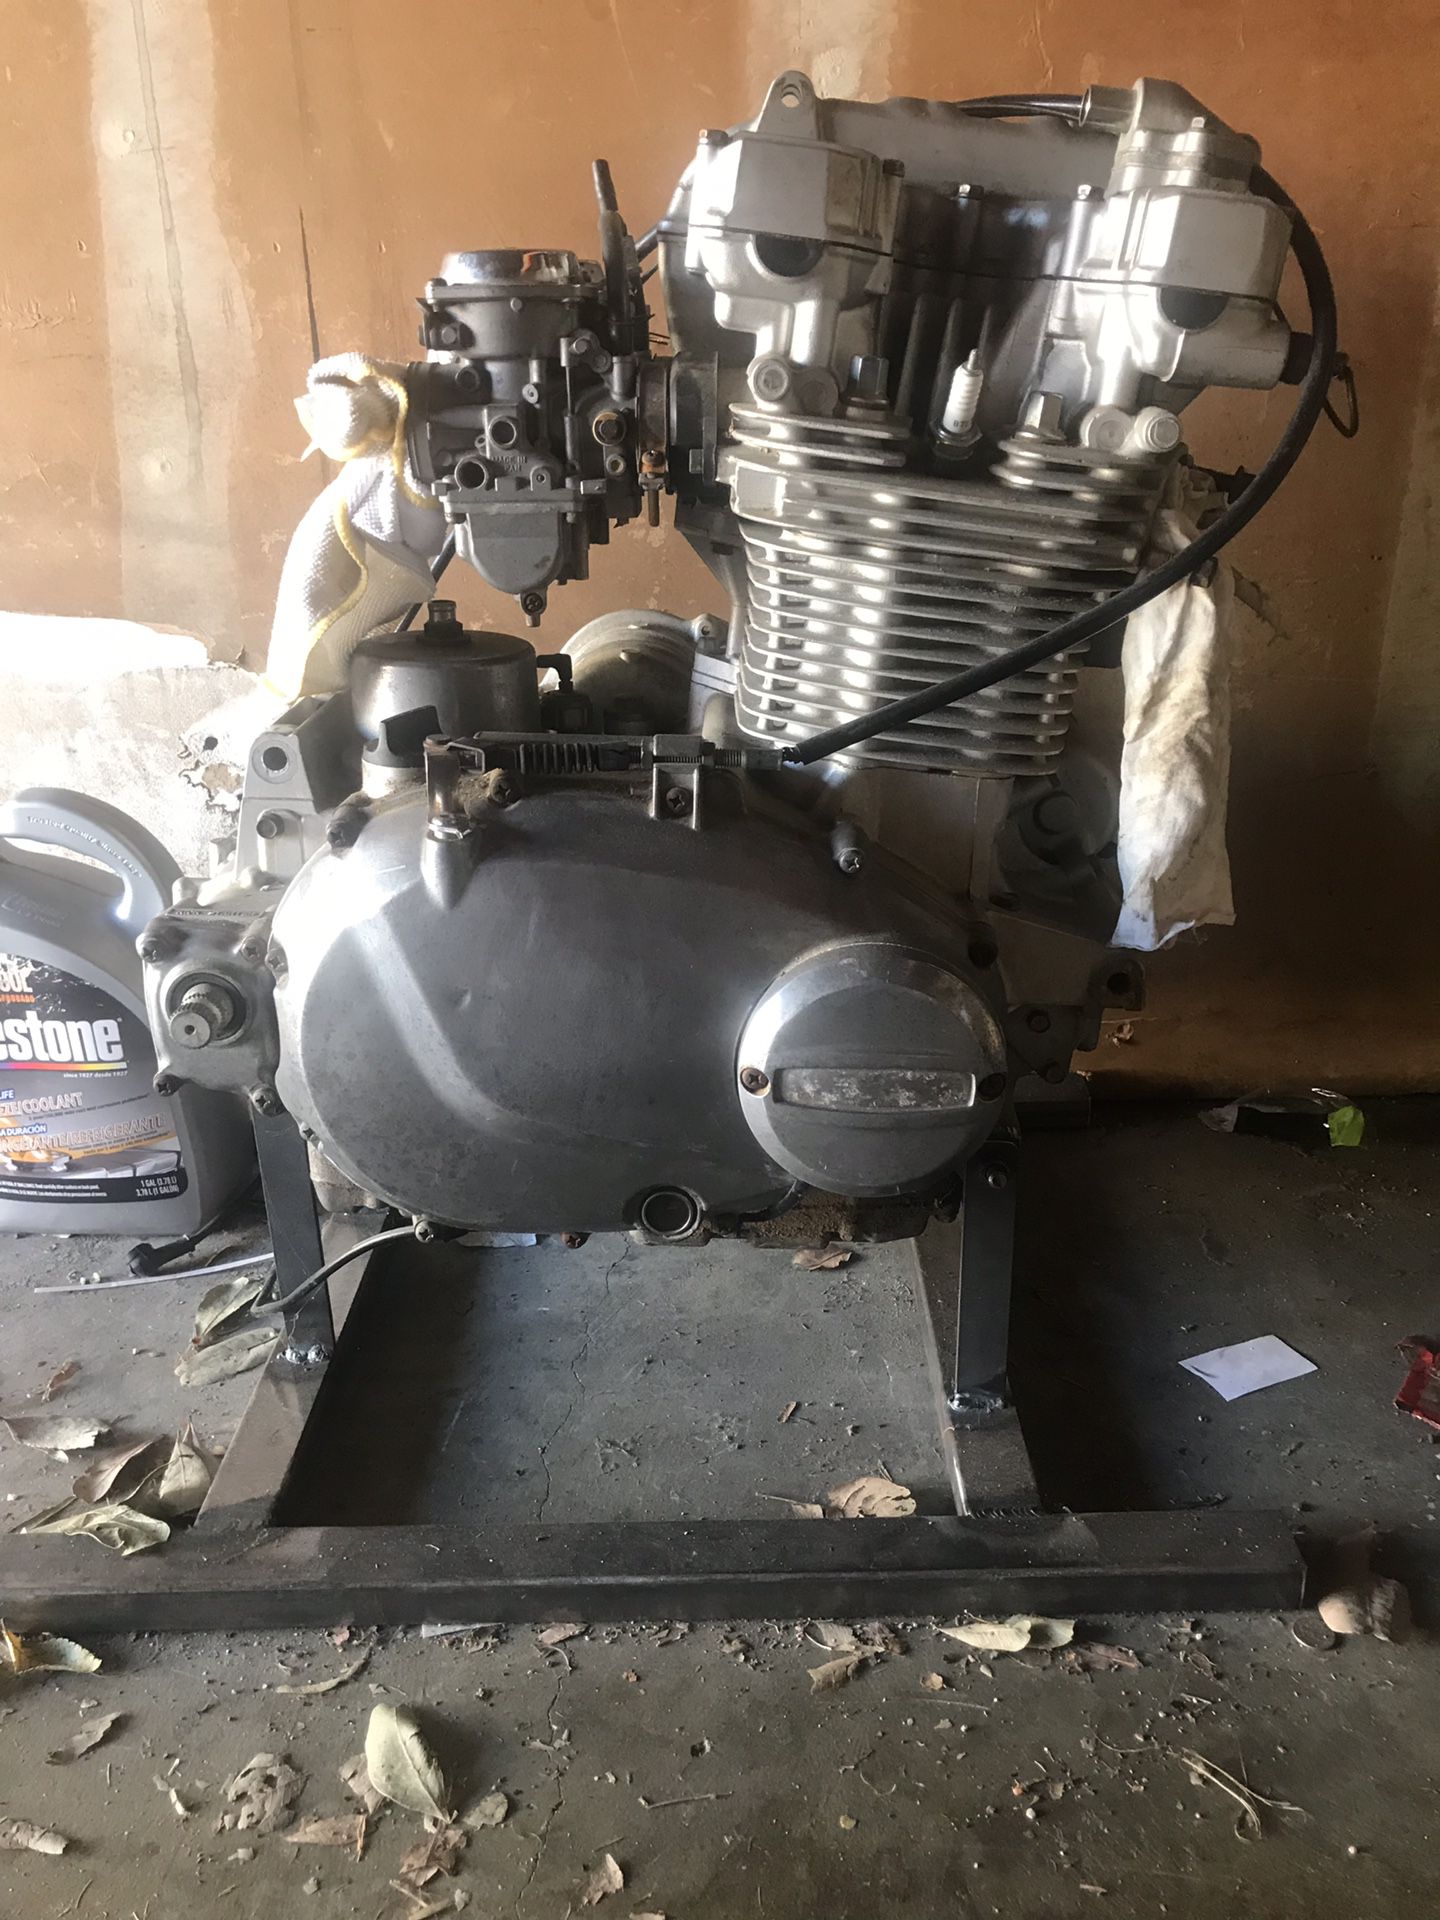 1979 kz 750 motor and parts